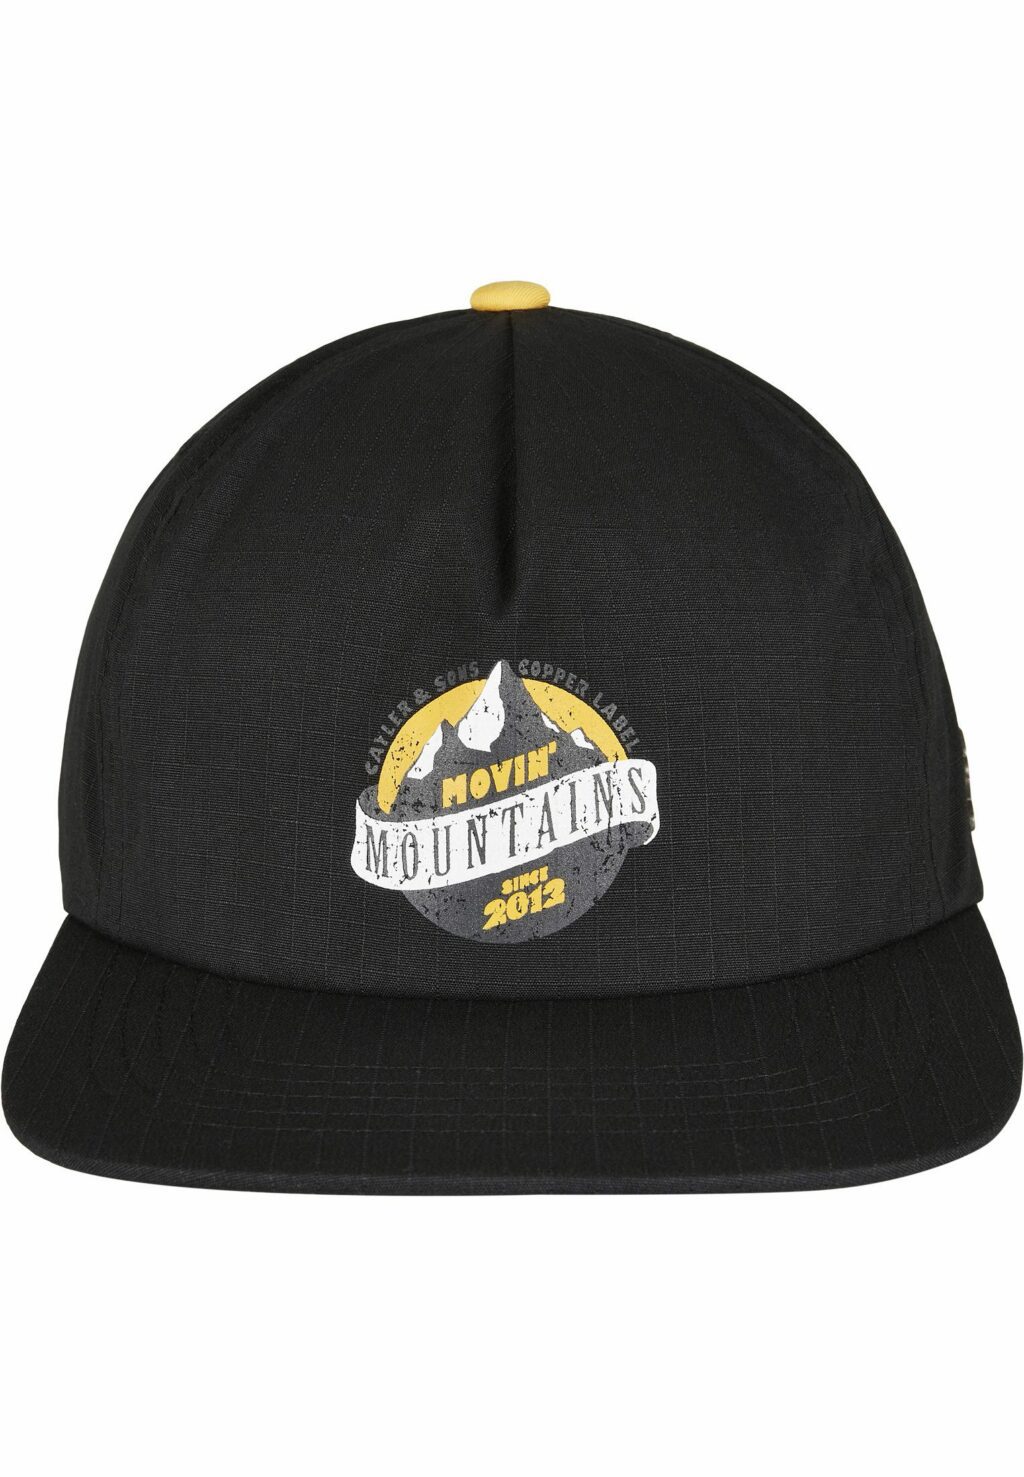 CL Movin Mountains Cap washed black/mc one CS2561